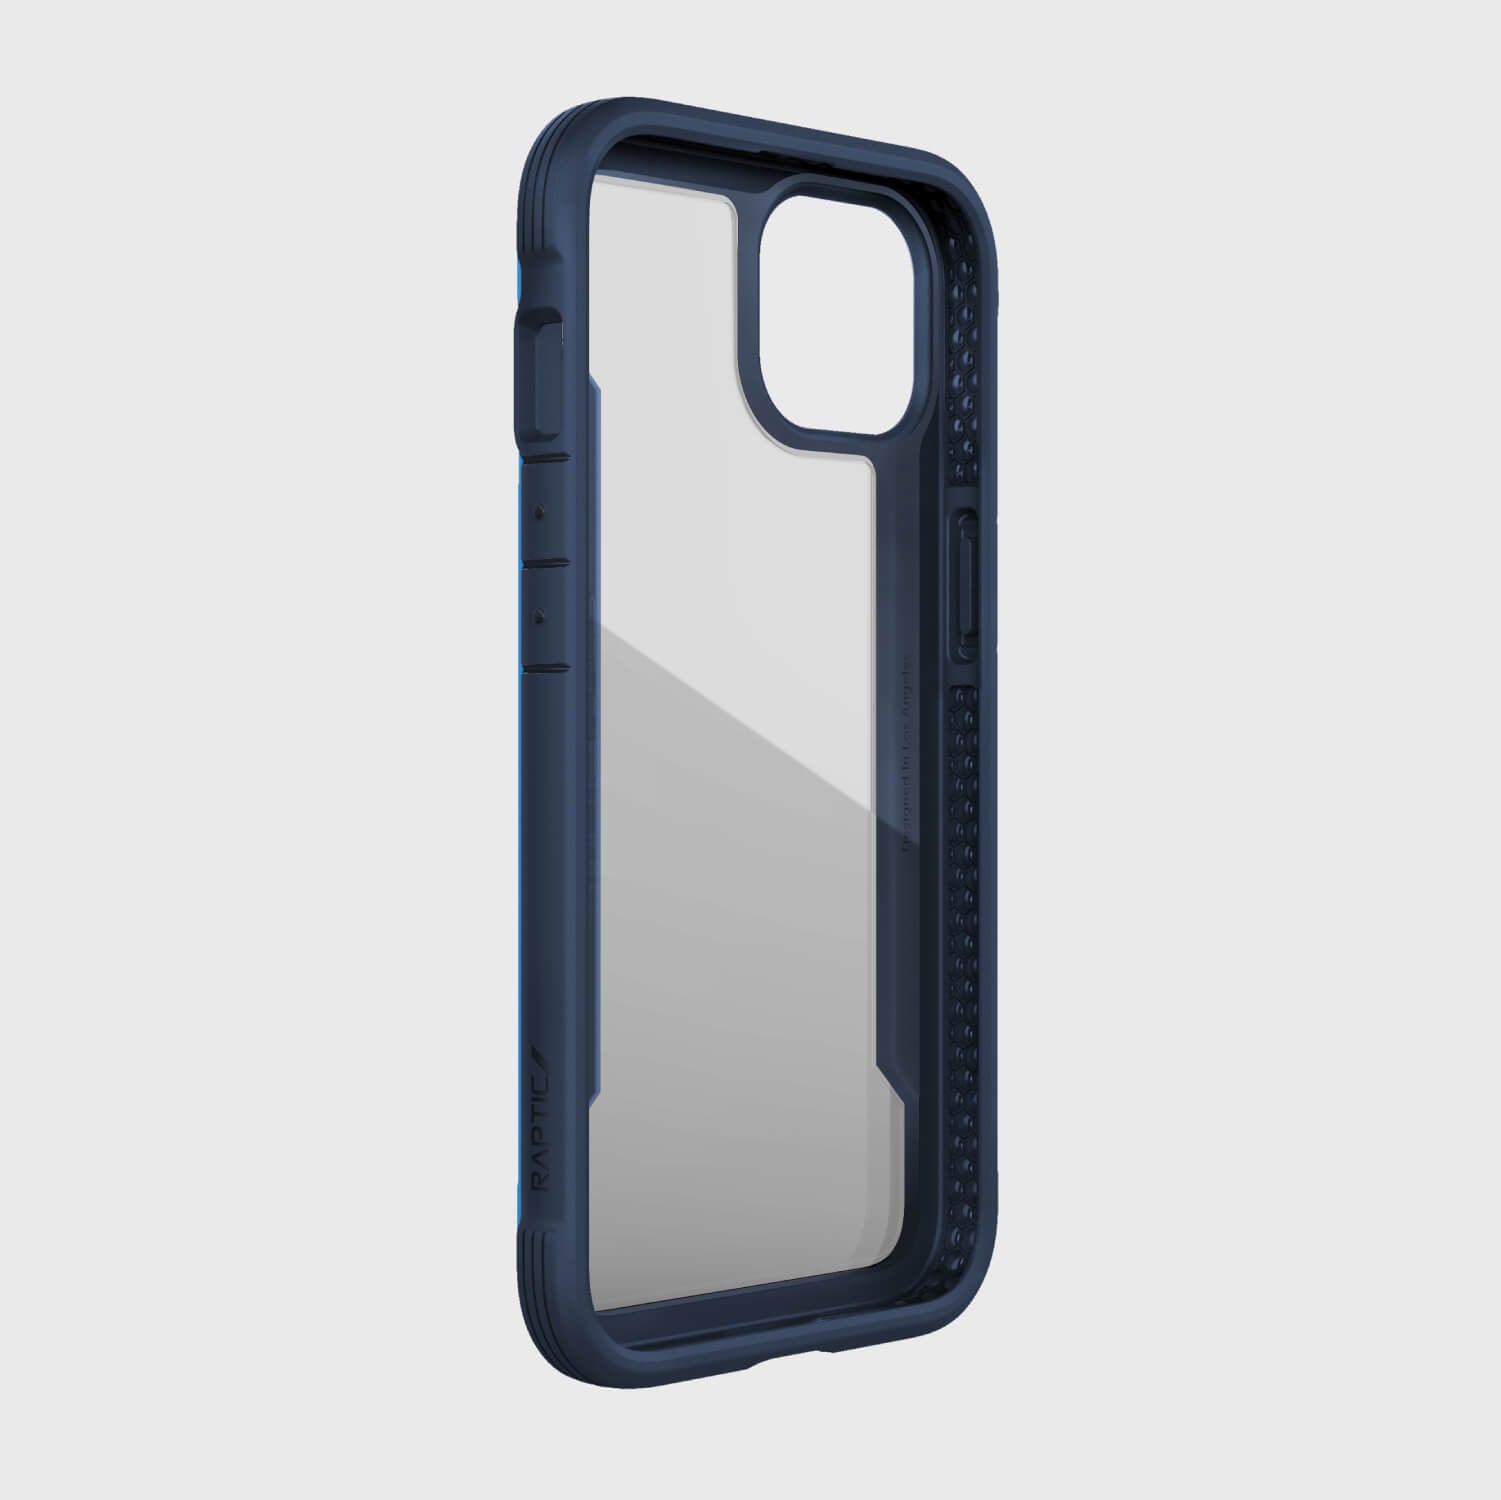 A blue iPhone 13 Case - SHIELD PRO by Raptic with a clear back, offering drop protection.